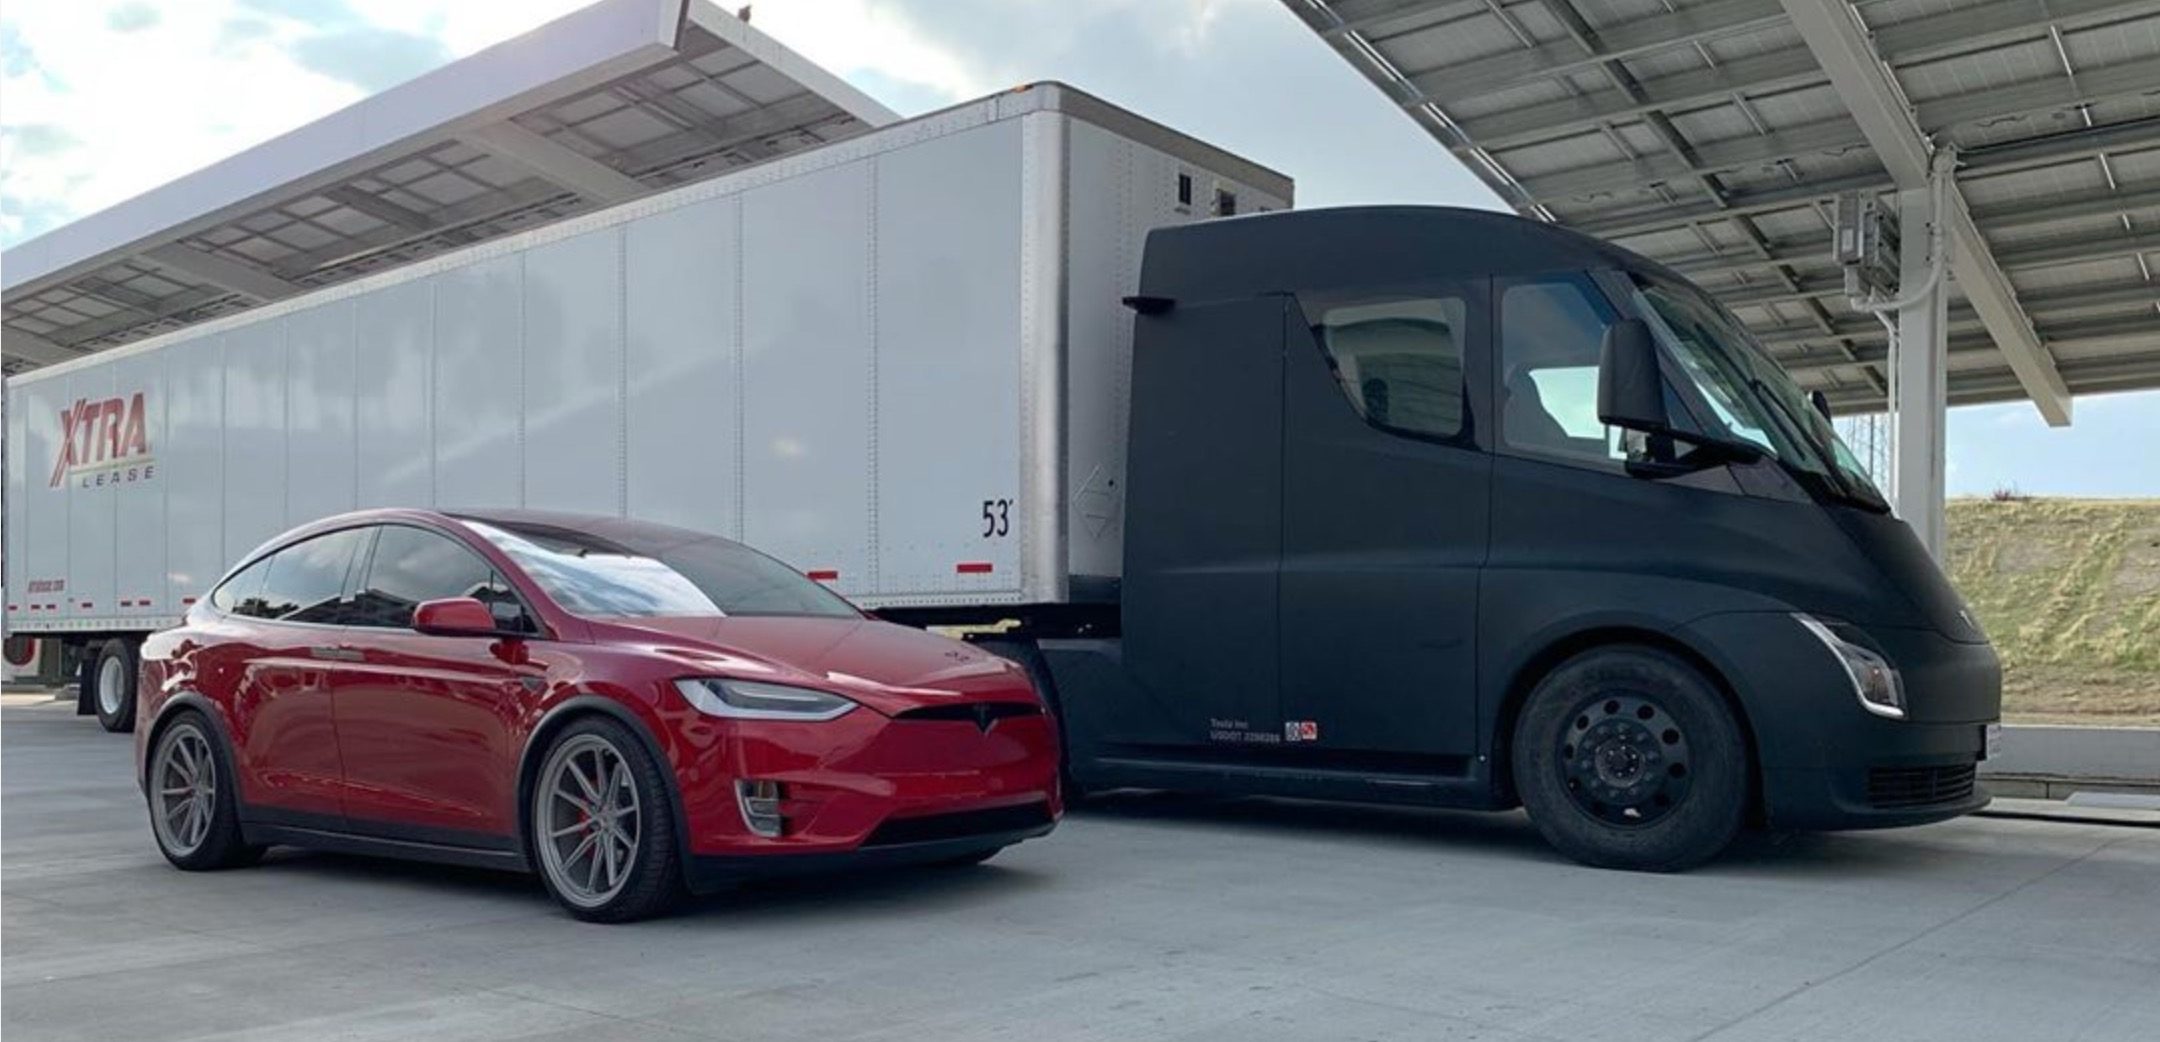 Tesla's New V4 Superchargers With Up to 350 kW of Power